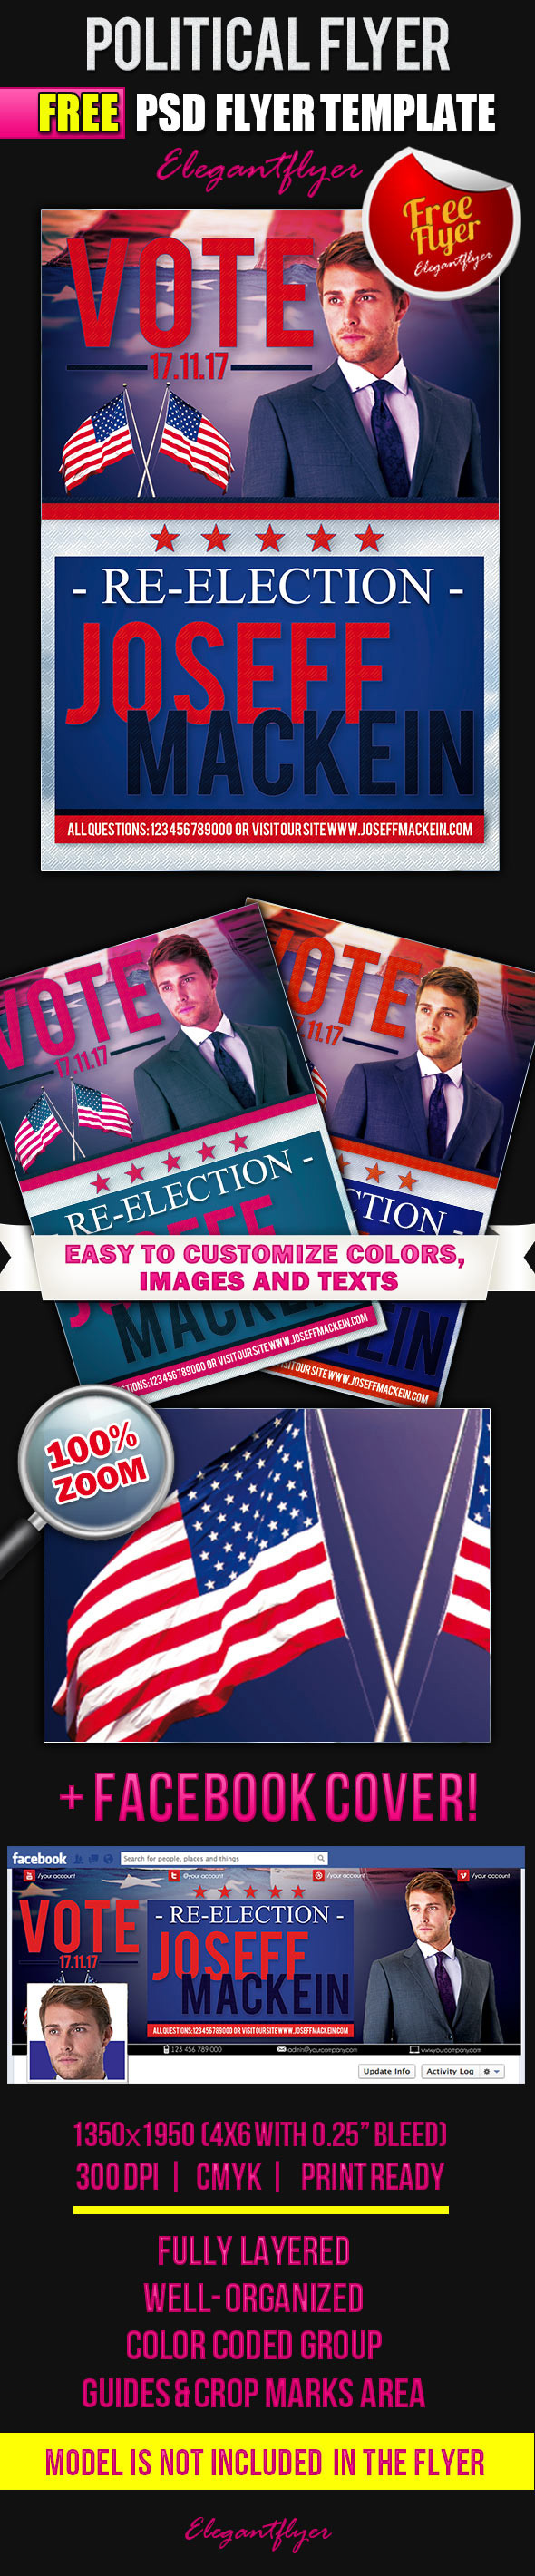 Political – Free Flyer PSD Template + Facebook Cover on Behance Throughout Political Flyer Template Free